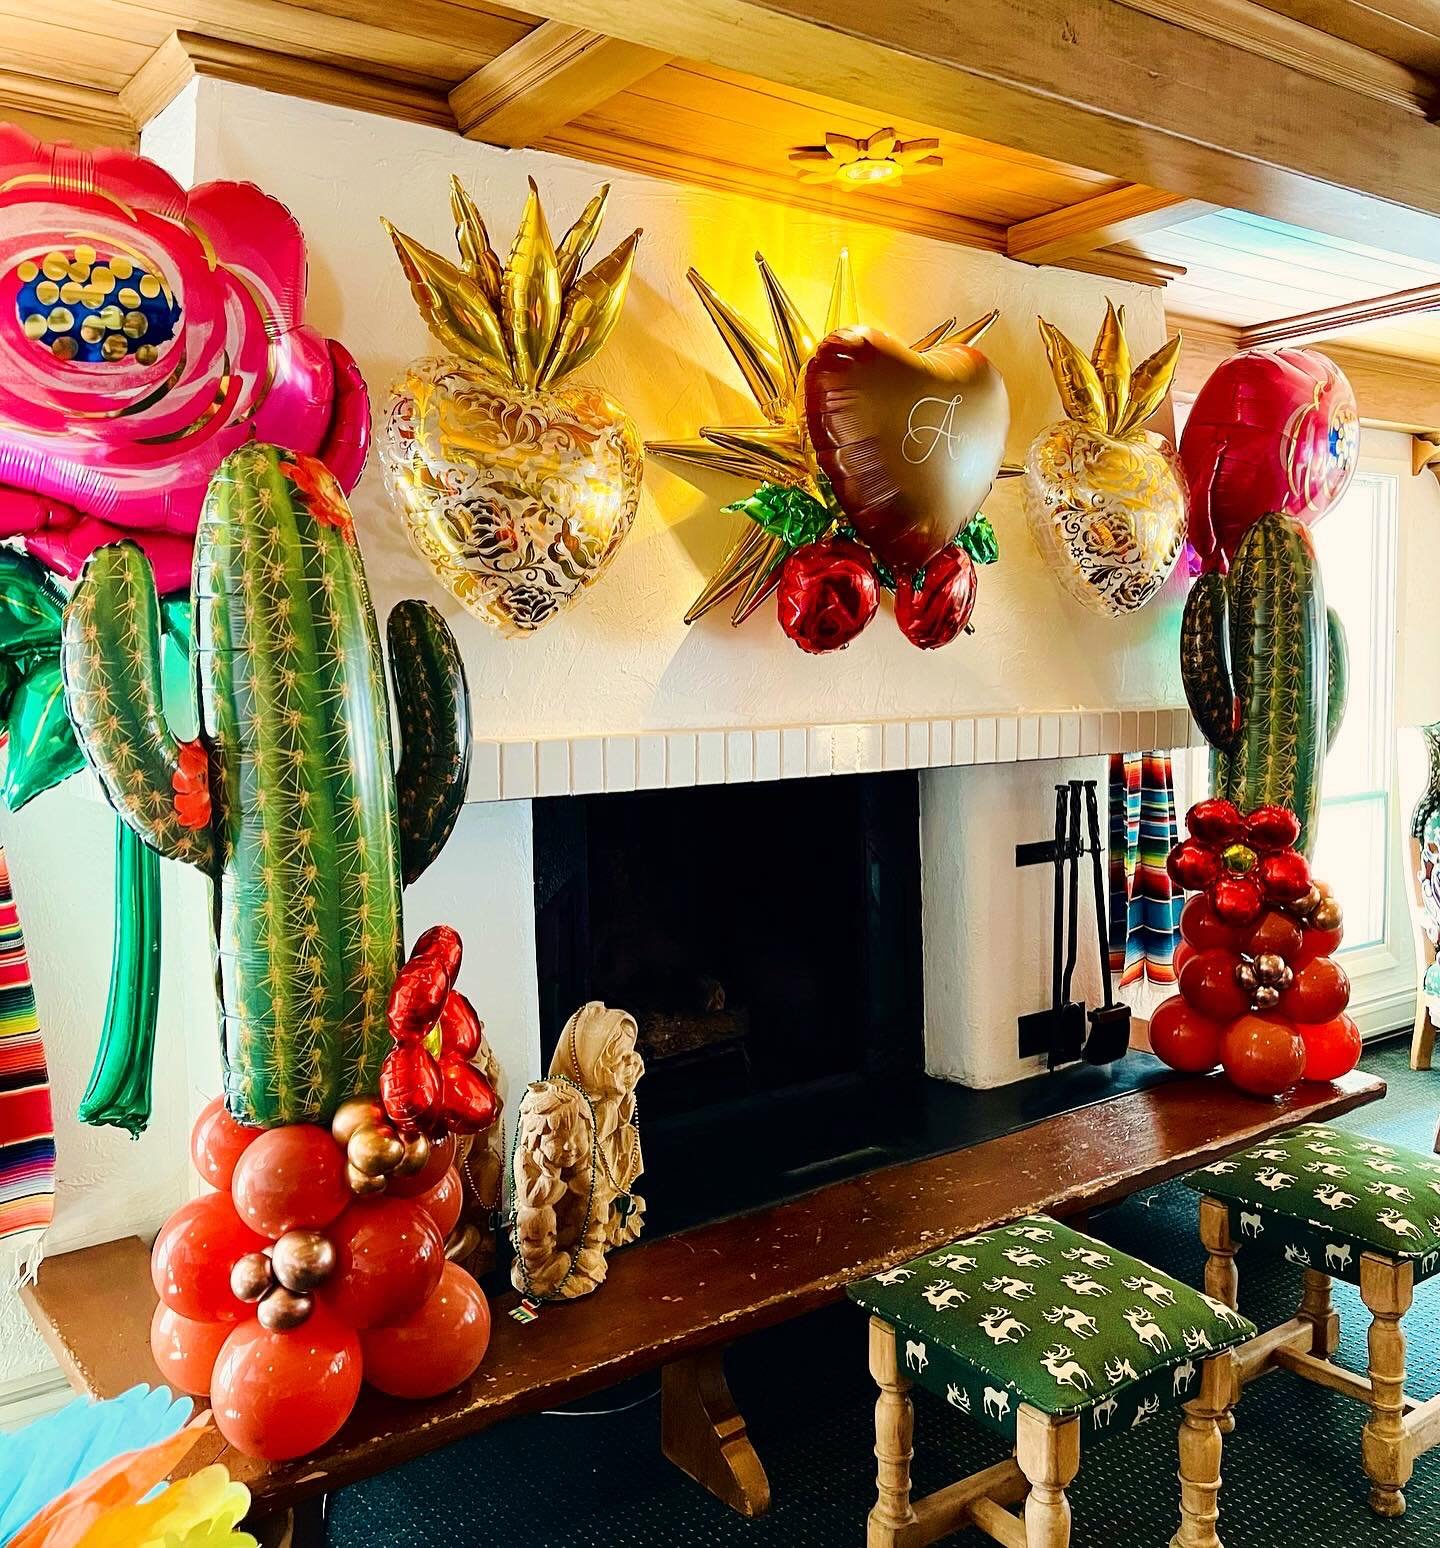 As we get ready to fiesta on Sunday, I am reminiscing back on this festive wedding welcome reception. The client wanted to bring a some Mexican sabor into the intimate Swiss chalet they rented for their guests. The sacred Hearst represented a weekend